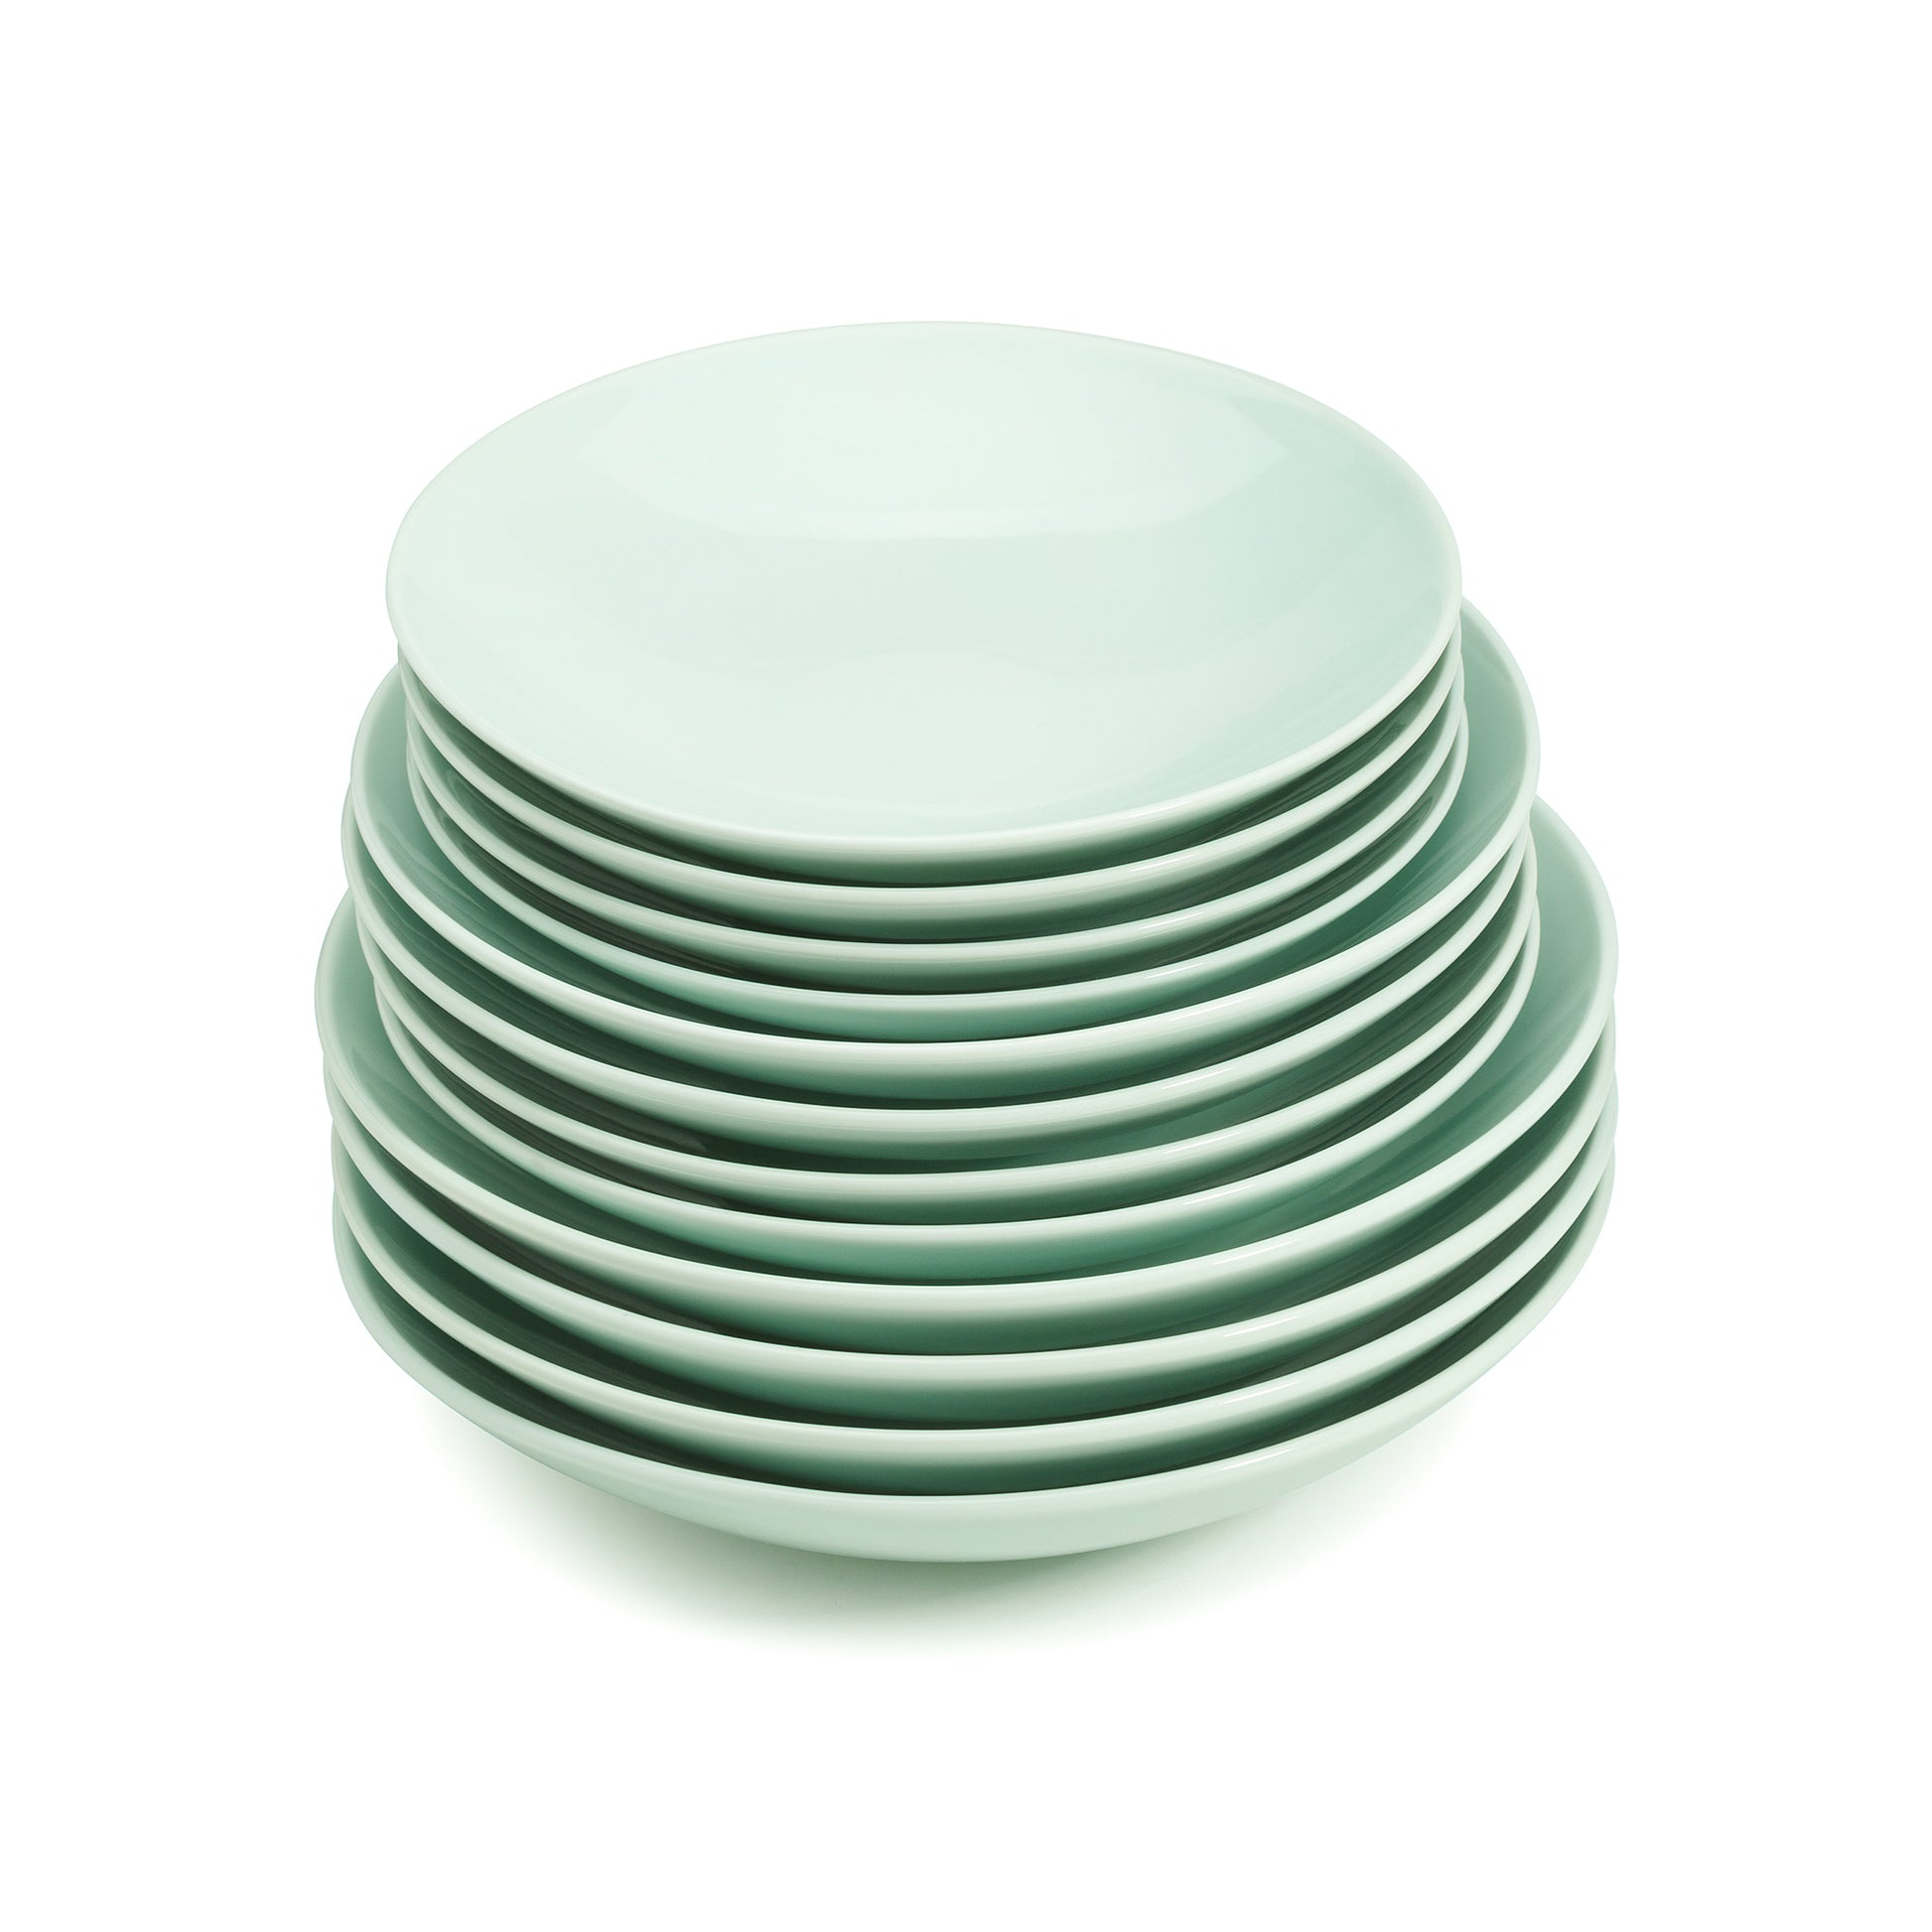 12 pieces green celadon porcelain coupe bowl set, all stacked, media 2 of 2